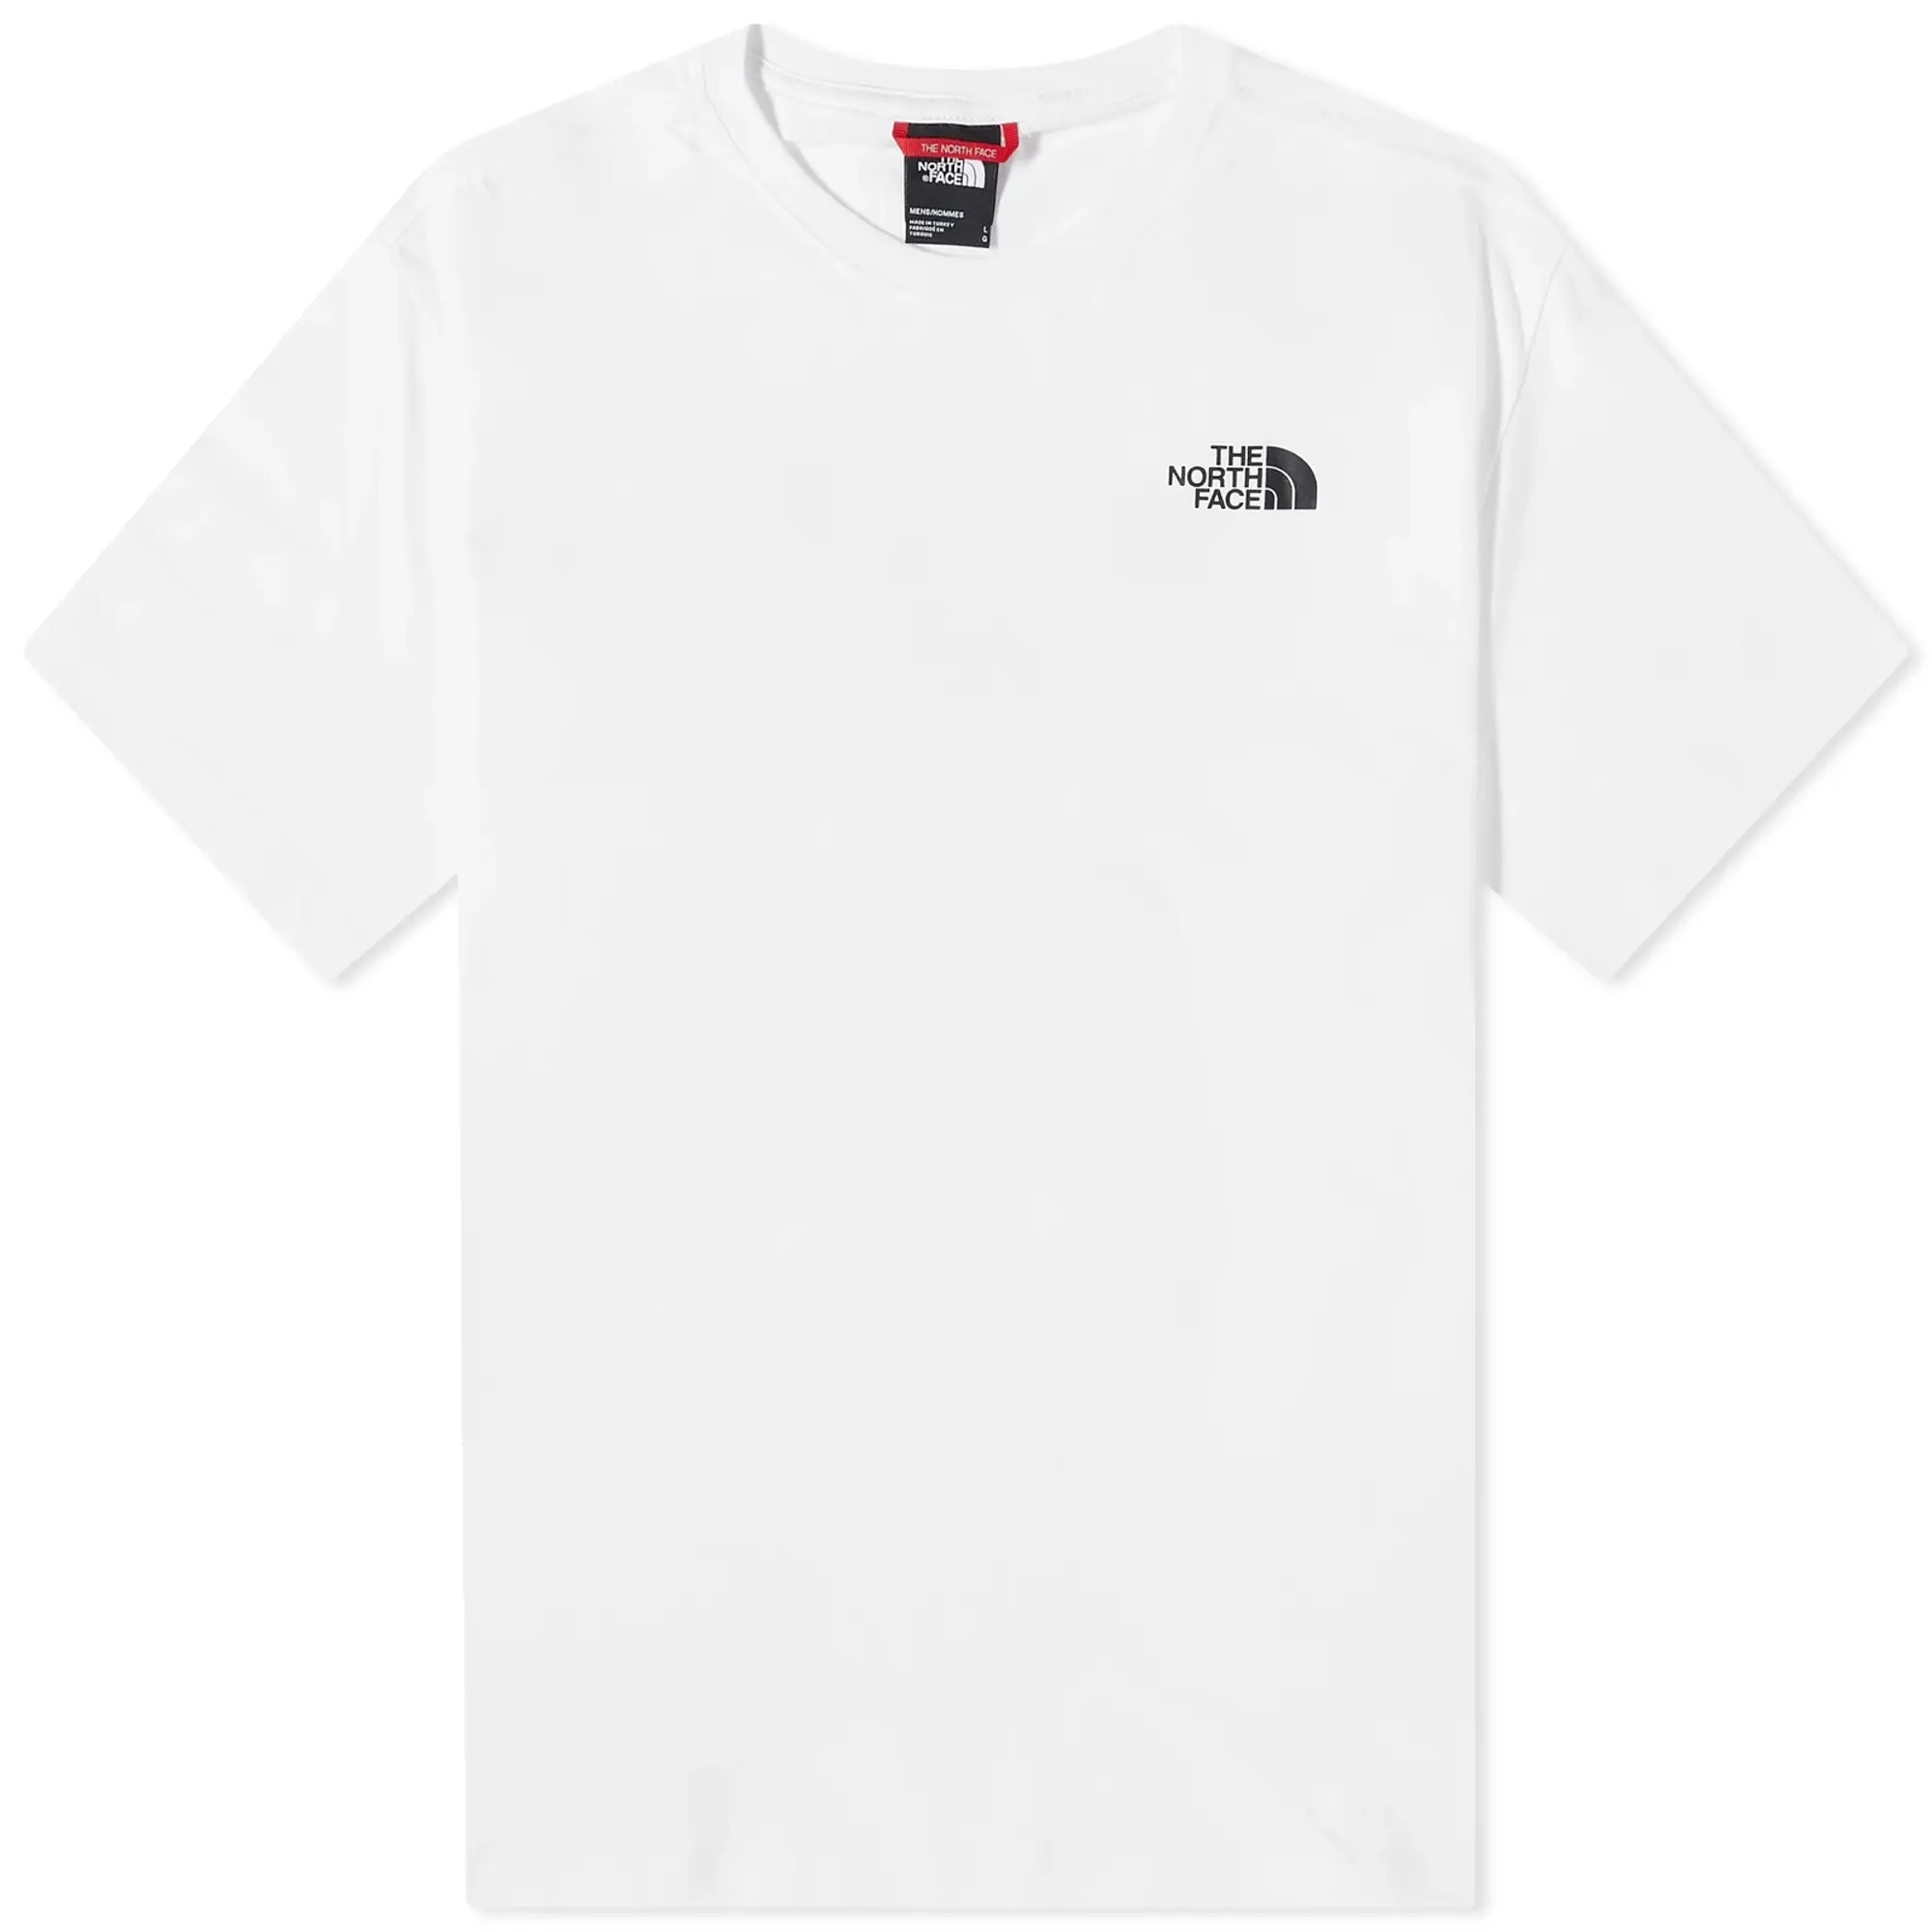 The North Face Mountain Outline T-Shirt, White